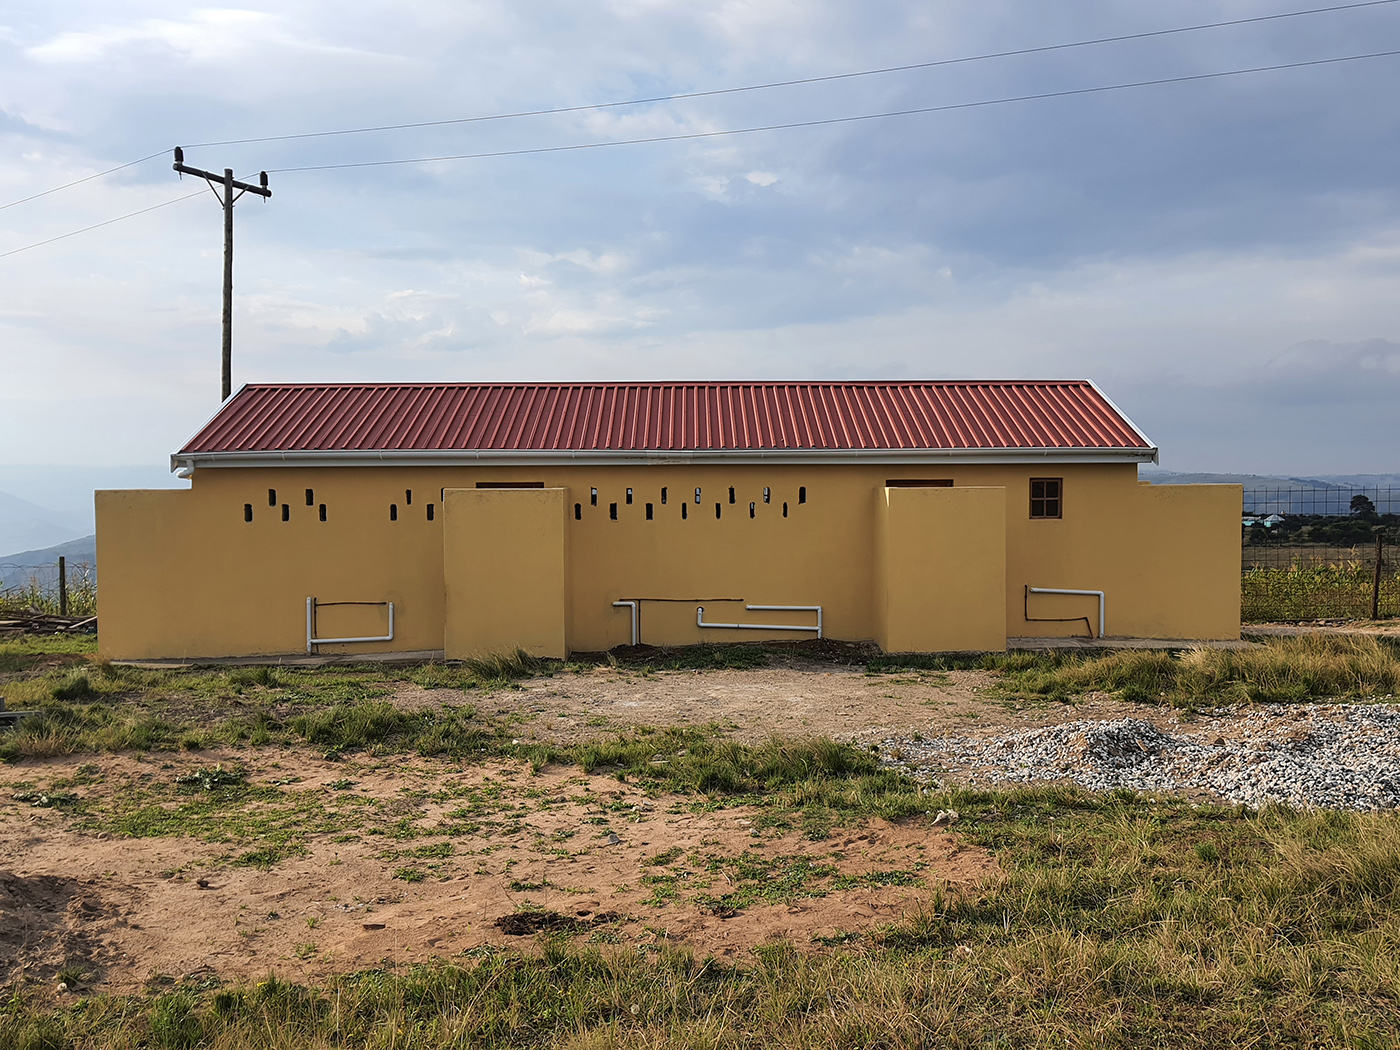 Thanks to Wild Coast Sun, Khanyisani Senior Primary School now has toilets for learners and teachers.